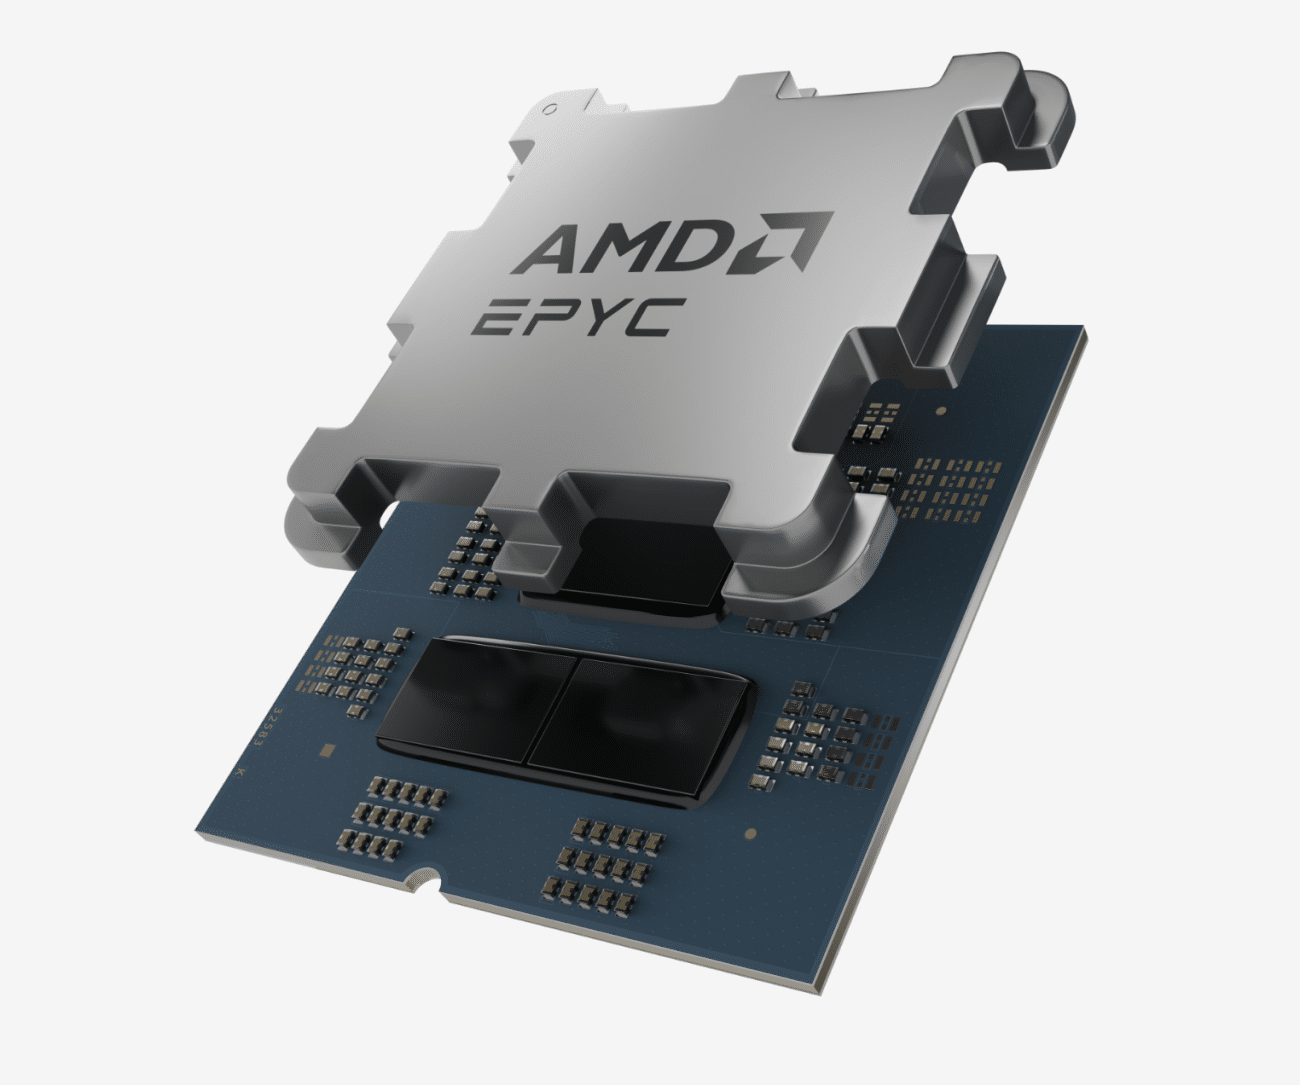 AMD Unveils EPYC 4004 Processors to Compete with Intel’s Xeon Processors